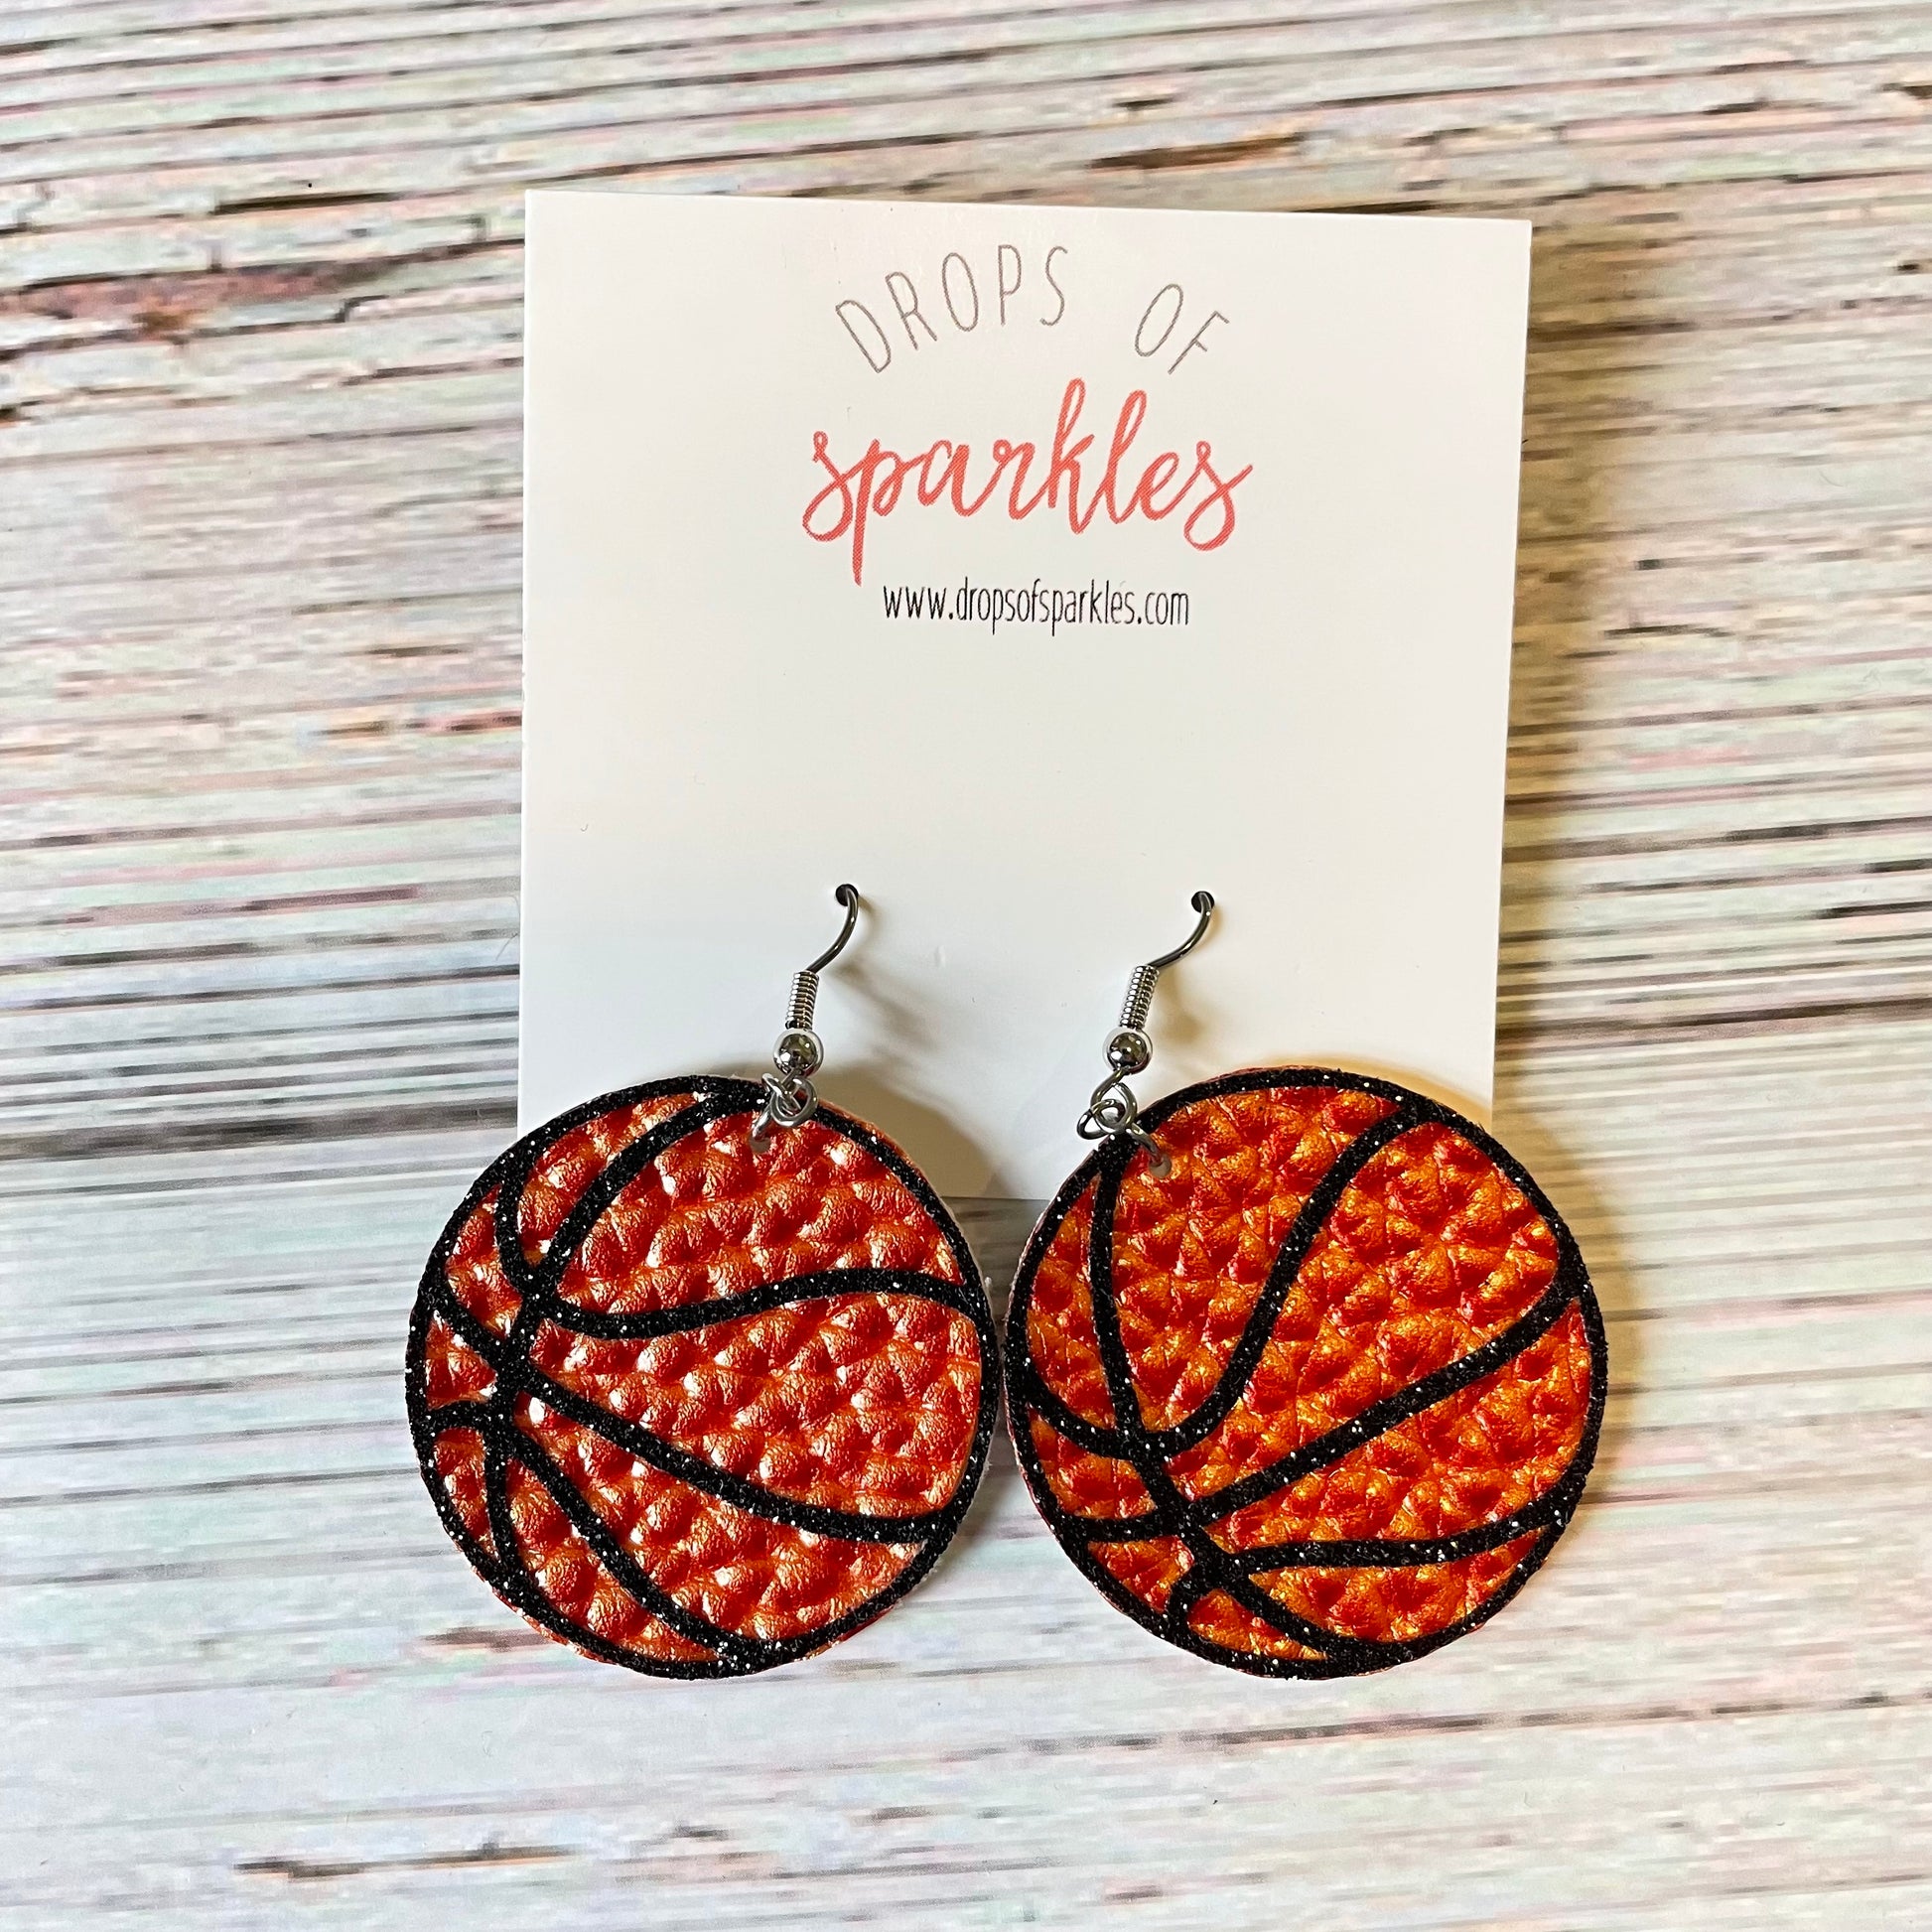 Basketball earrings made of faux orange pebbled leather with black glitter vinyl.